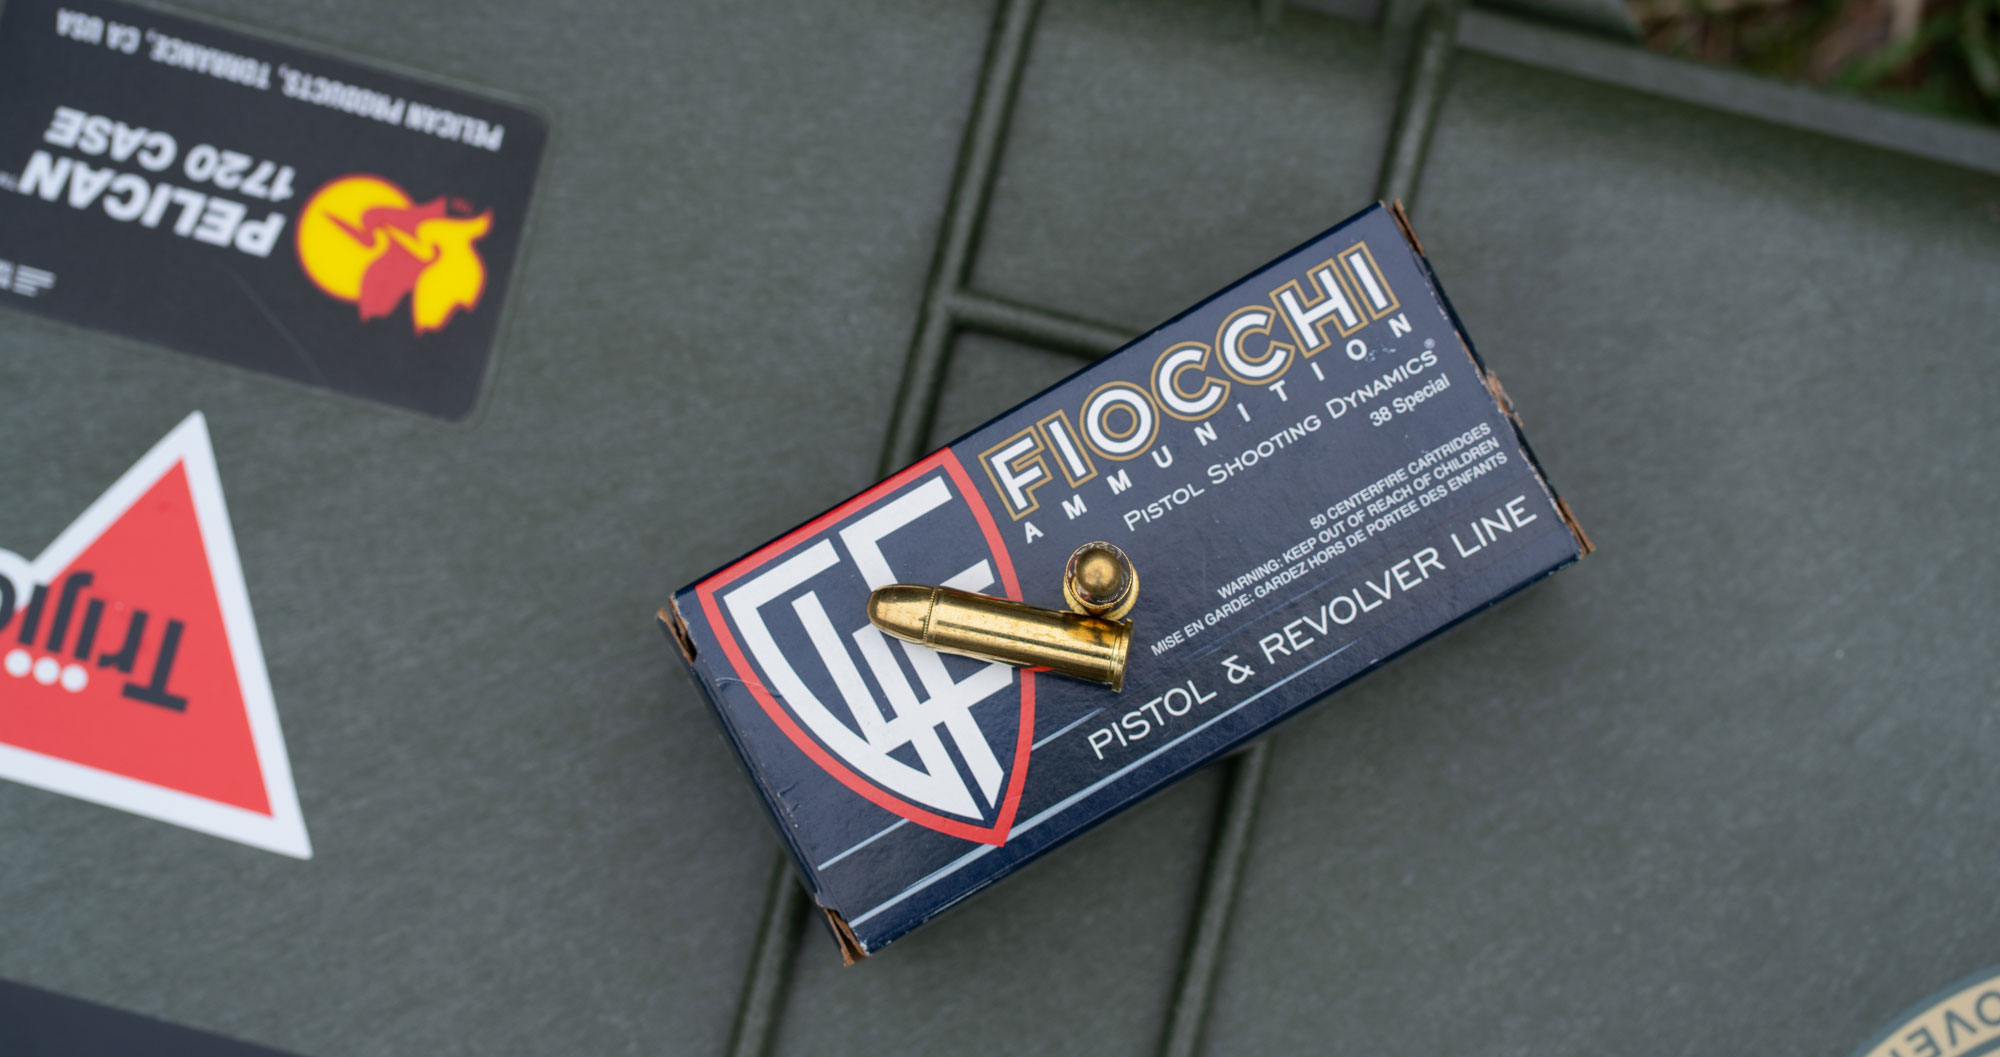 38 special ammo made by Fiocchi